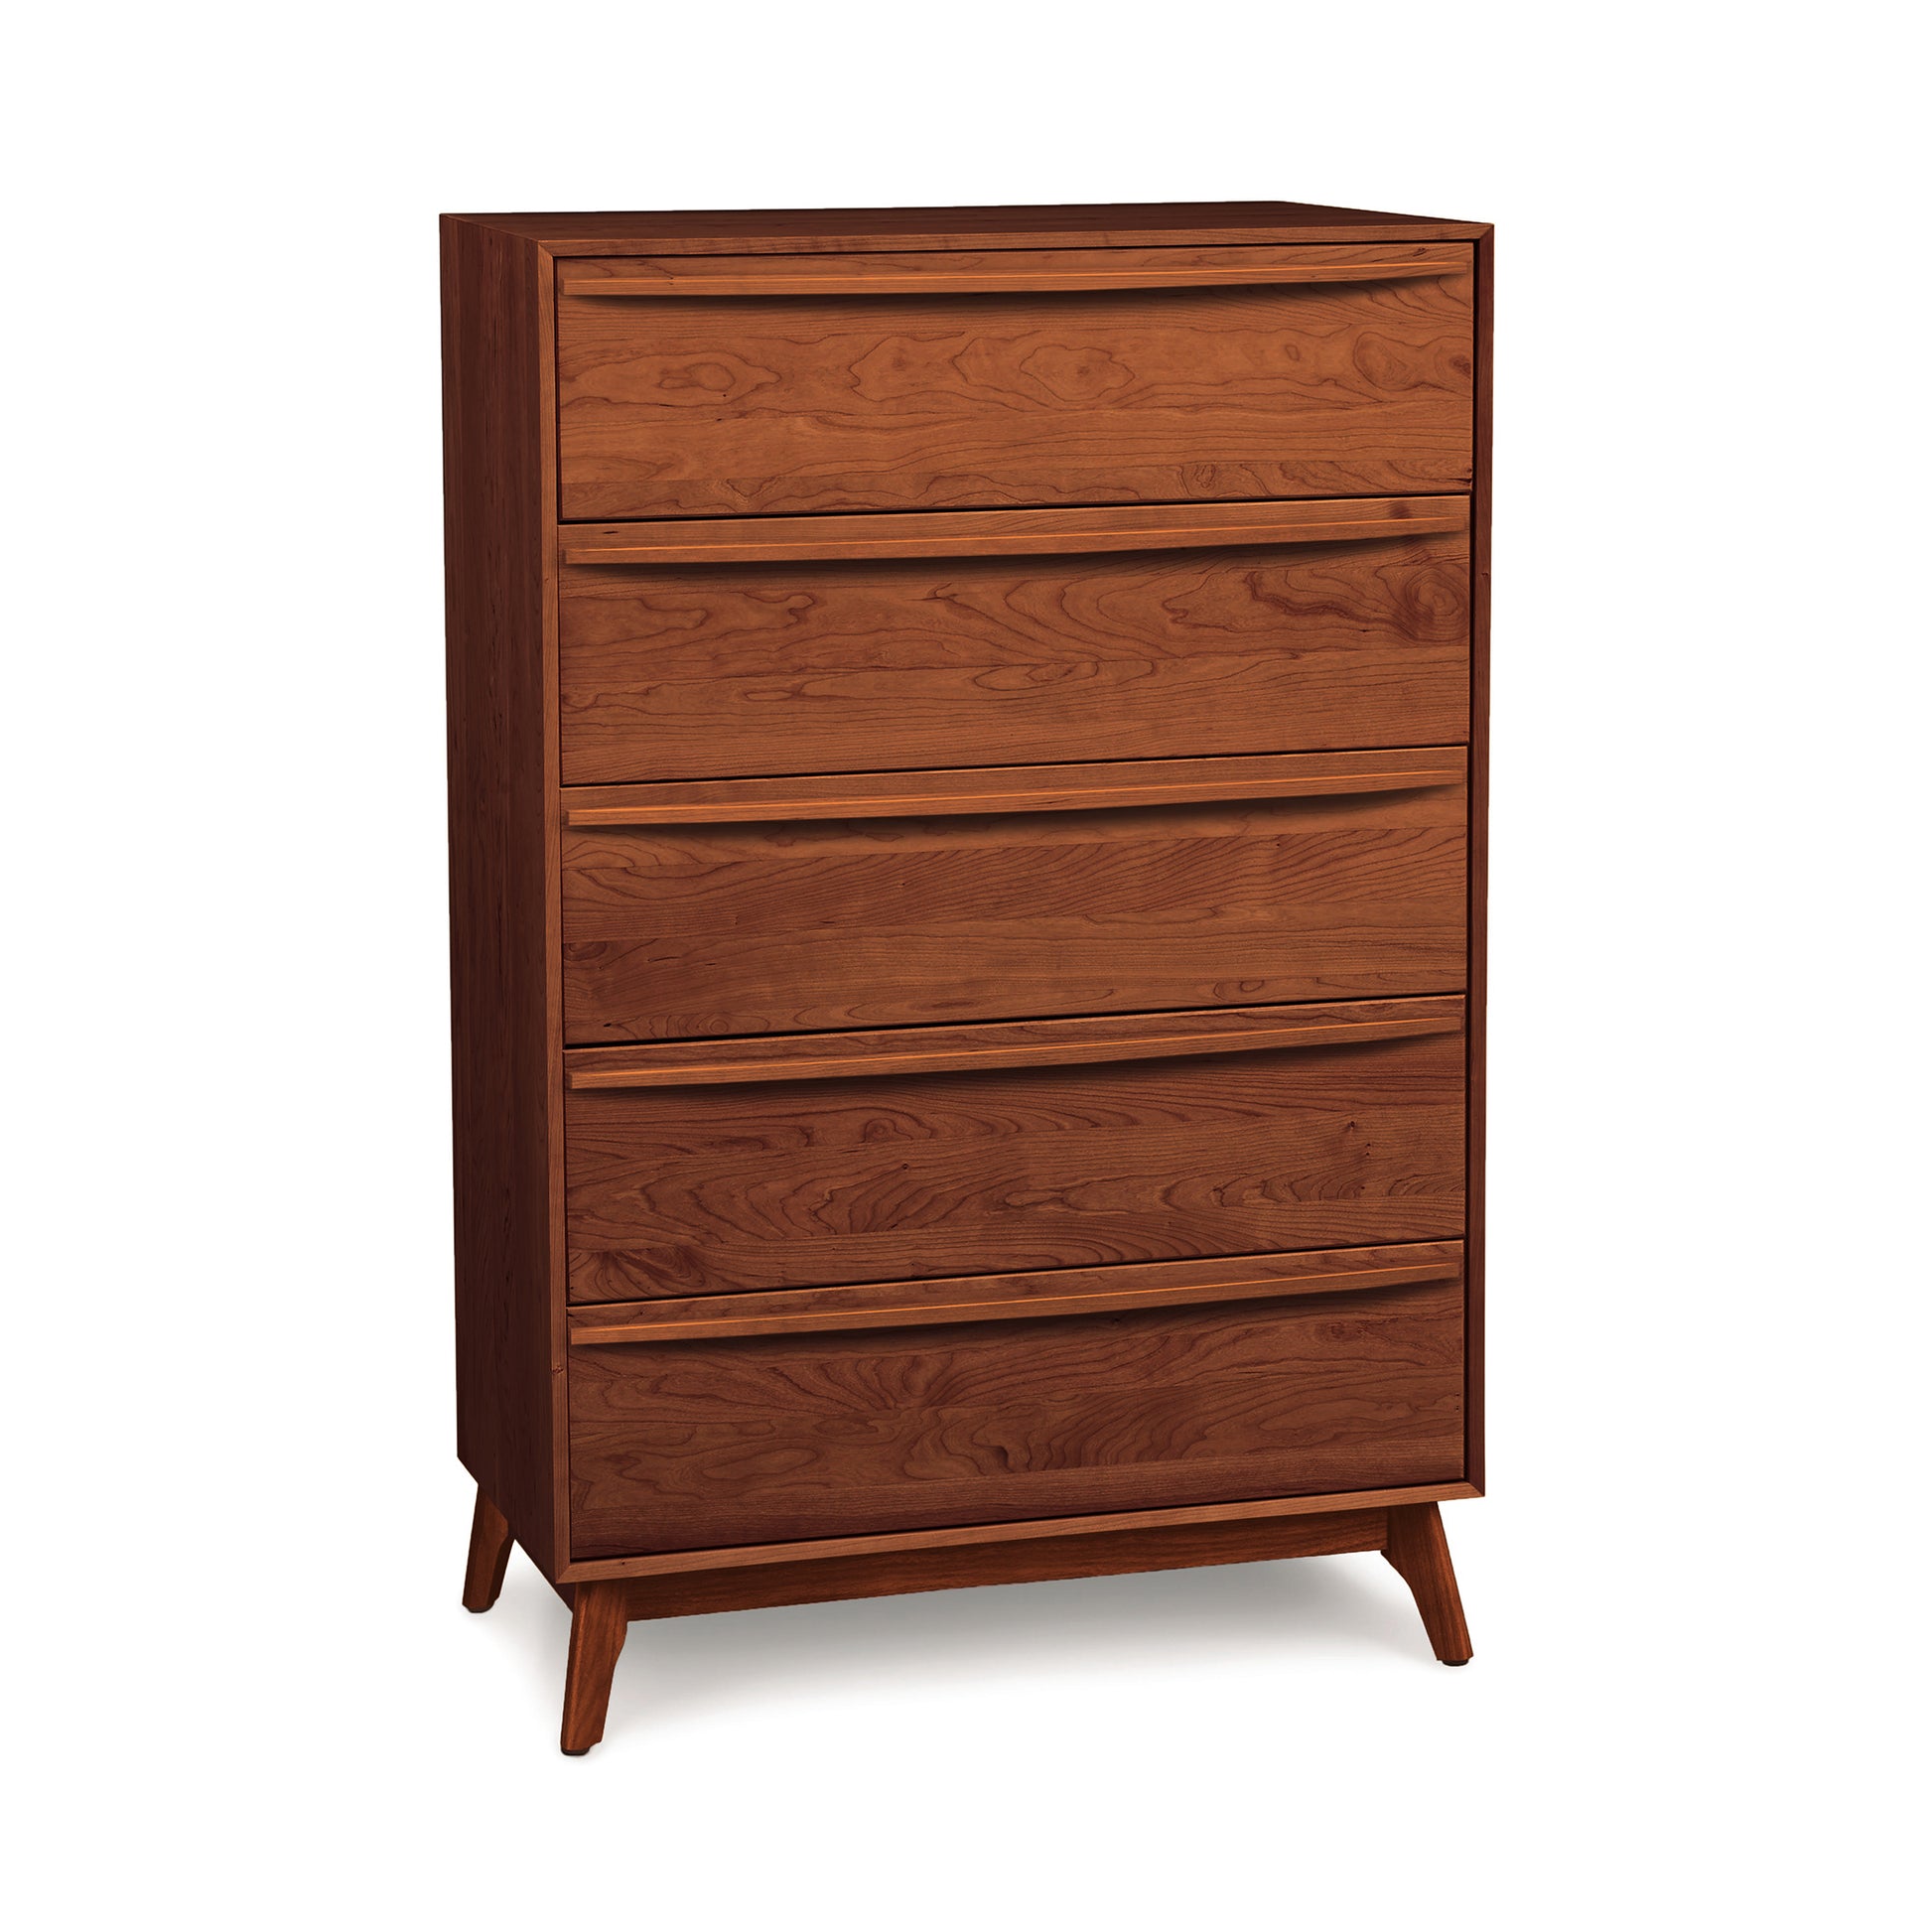 A mid-century modern style bedroom chest, named Catalina 5-Drawer Wide Chest by Copeland Furniture, on a white background.